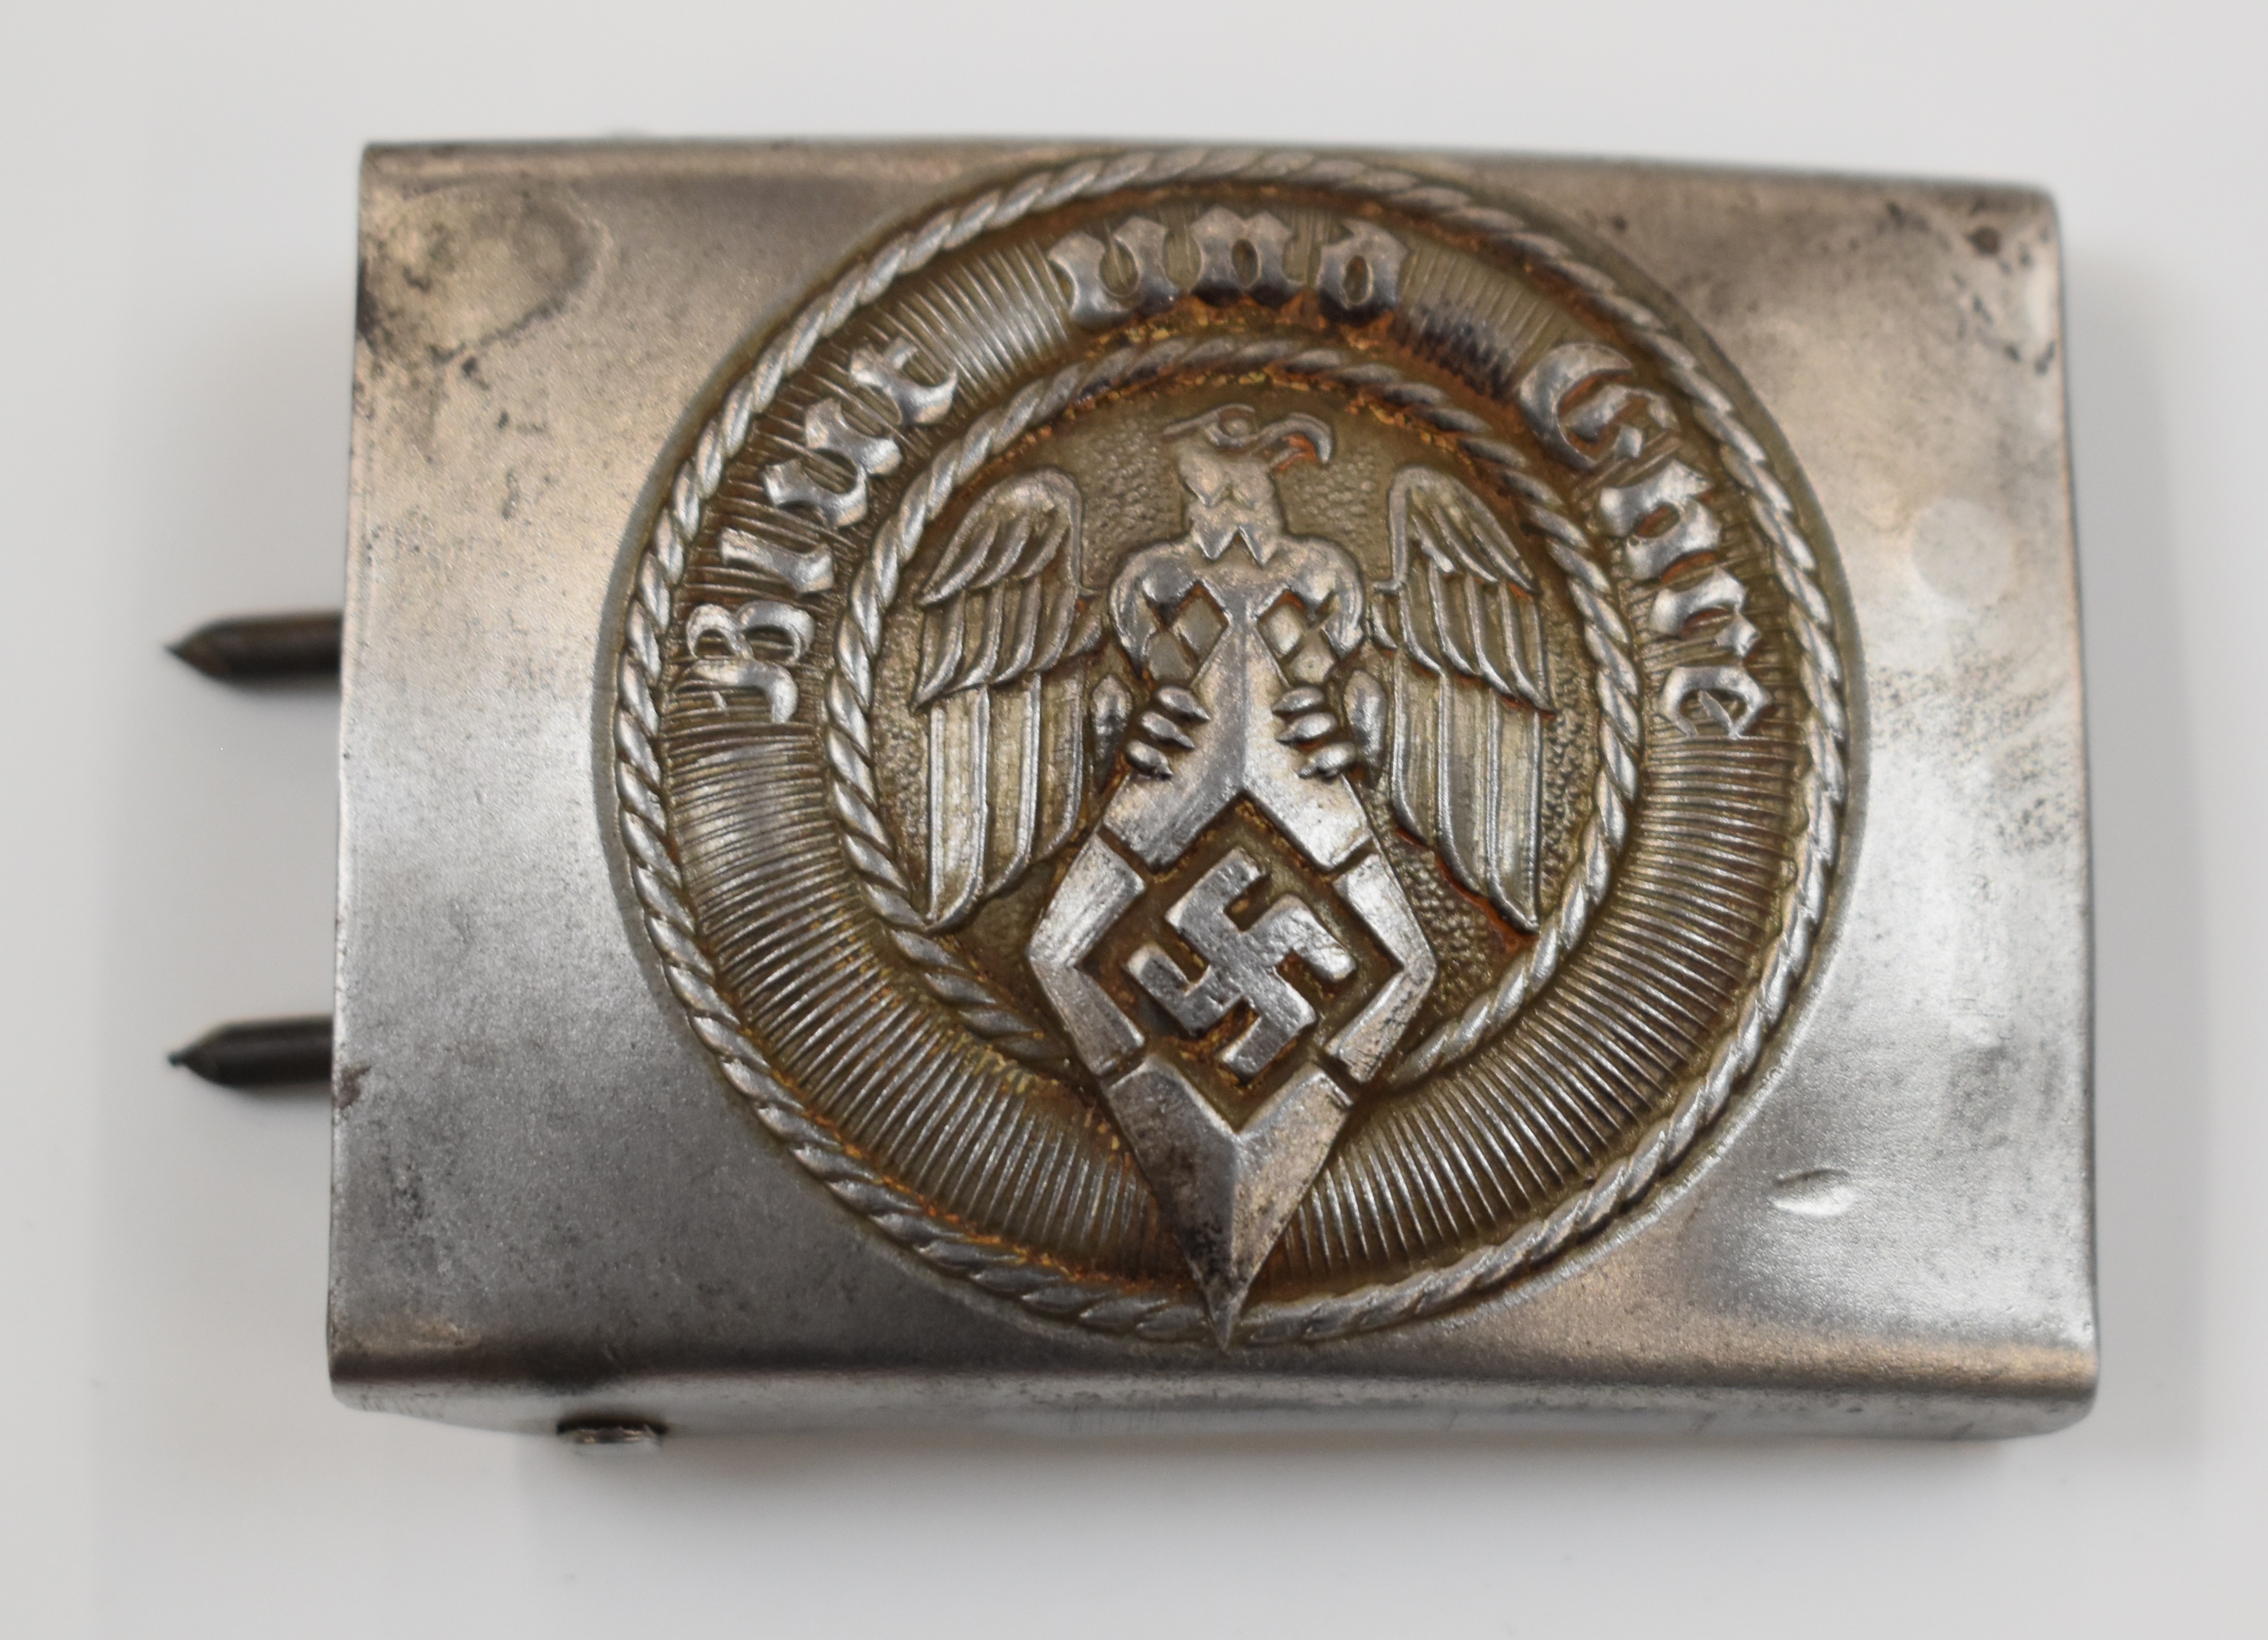 German WW2 Nazi Third Reich Hitler Youth belt buckle with Ges Gesch and maker's mark to reverse